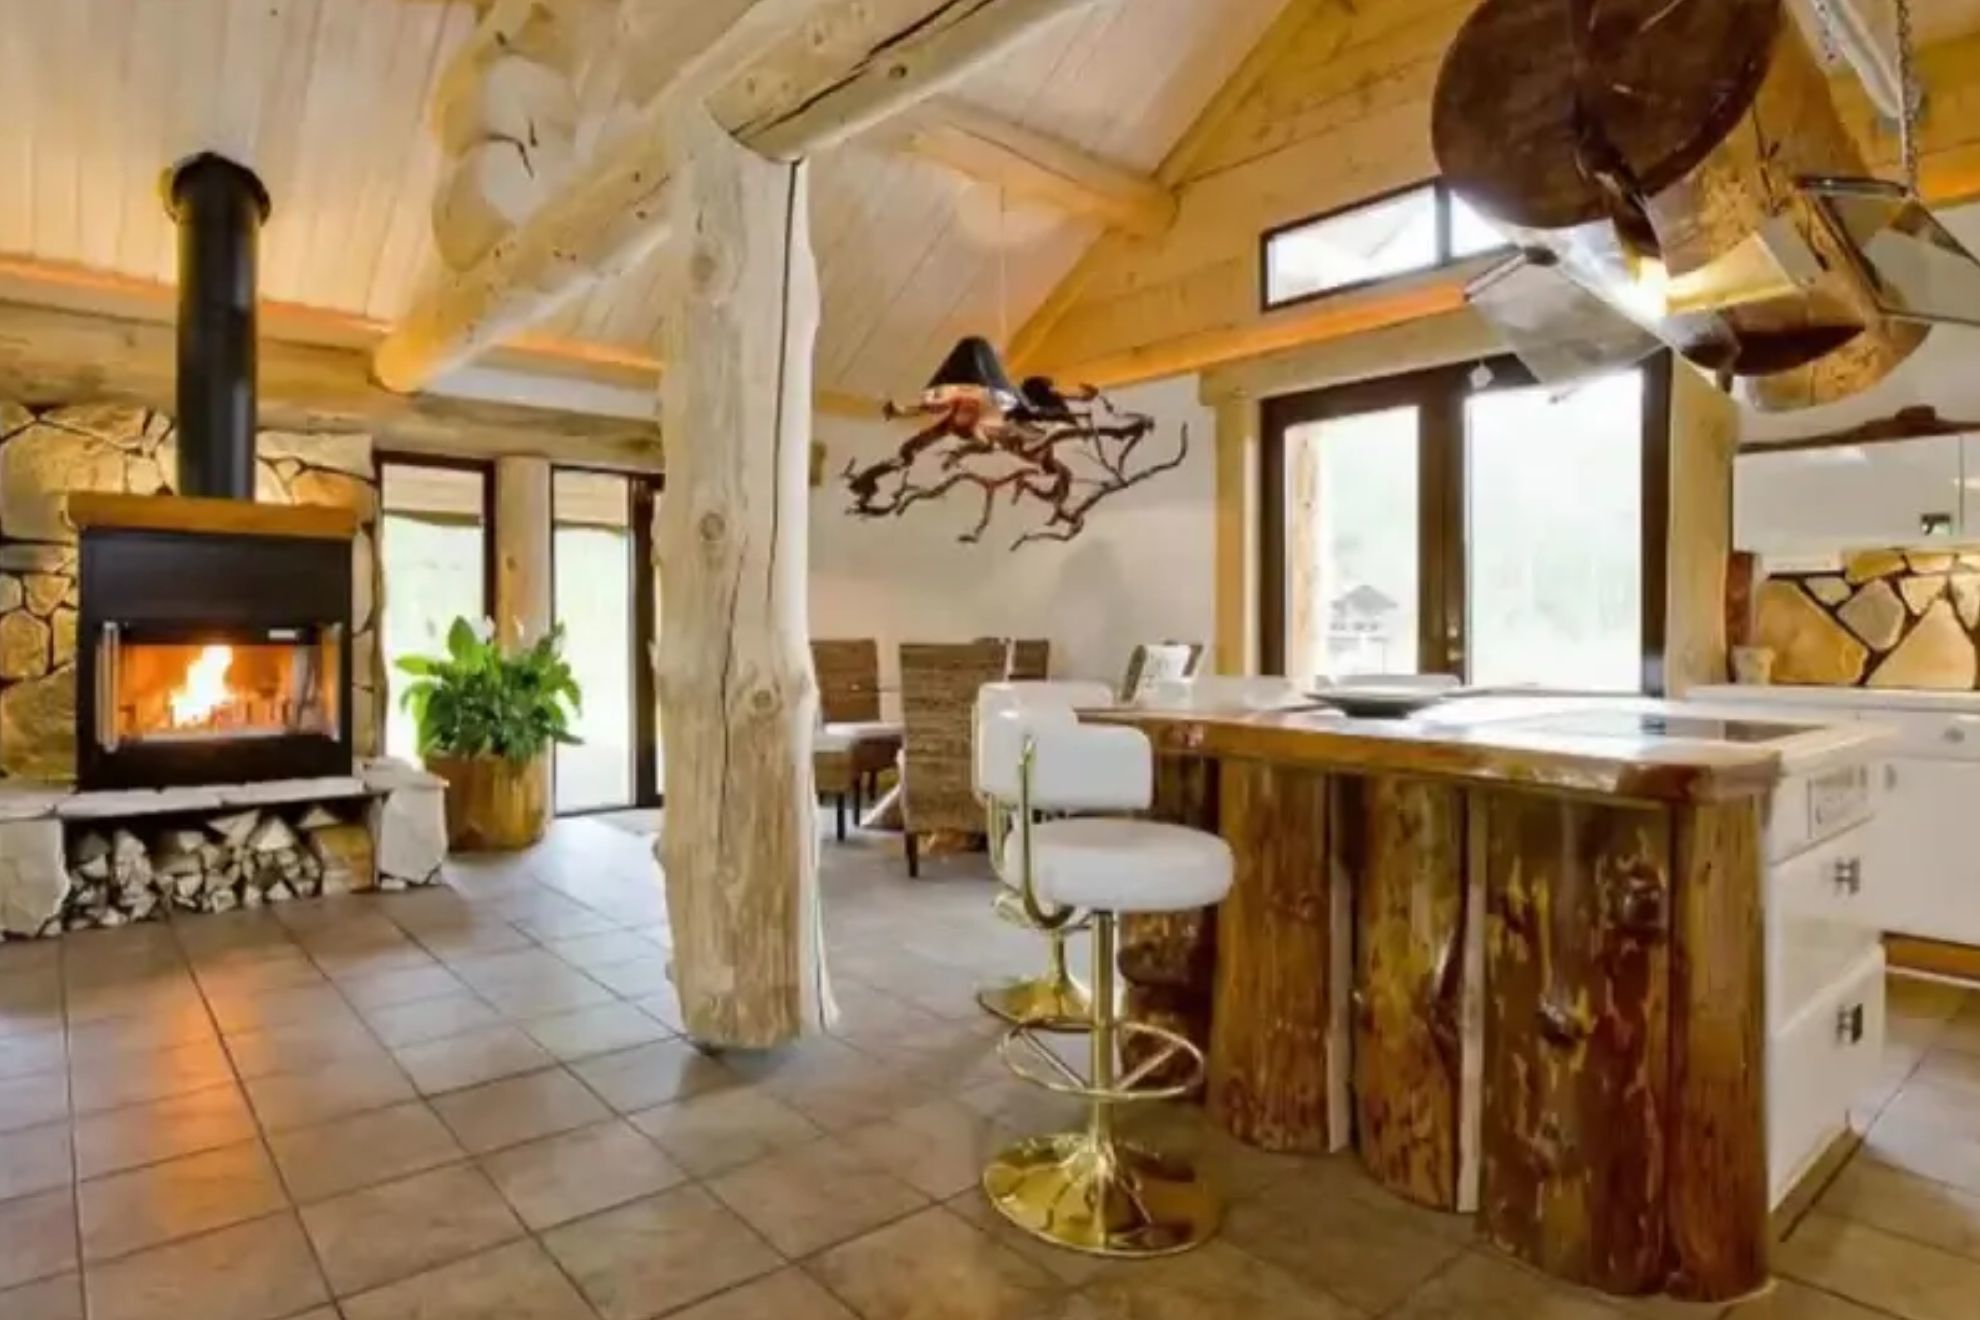 The cabin aesthetic is specific to this one room